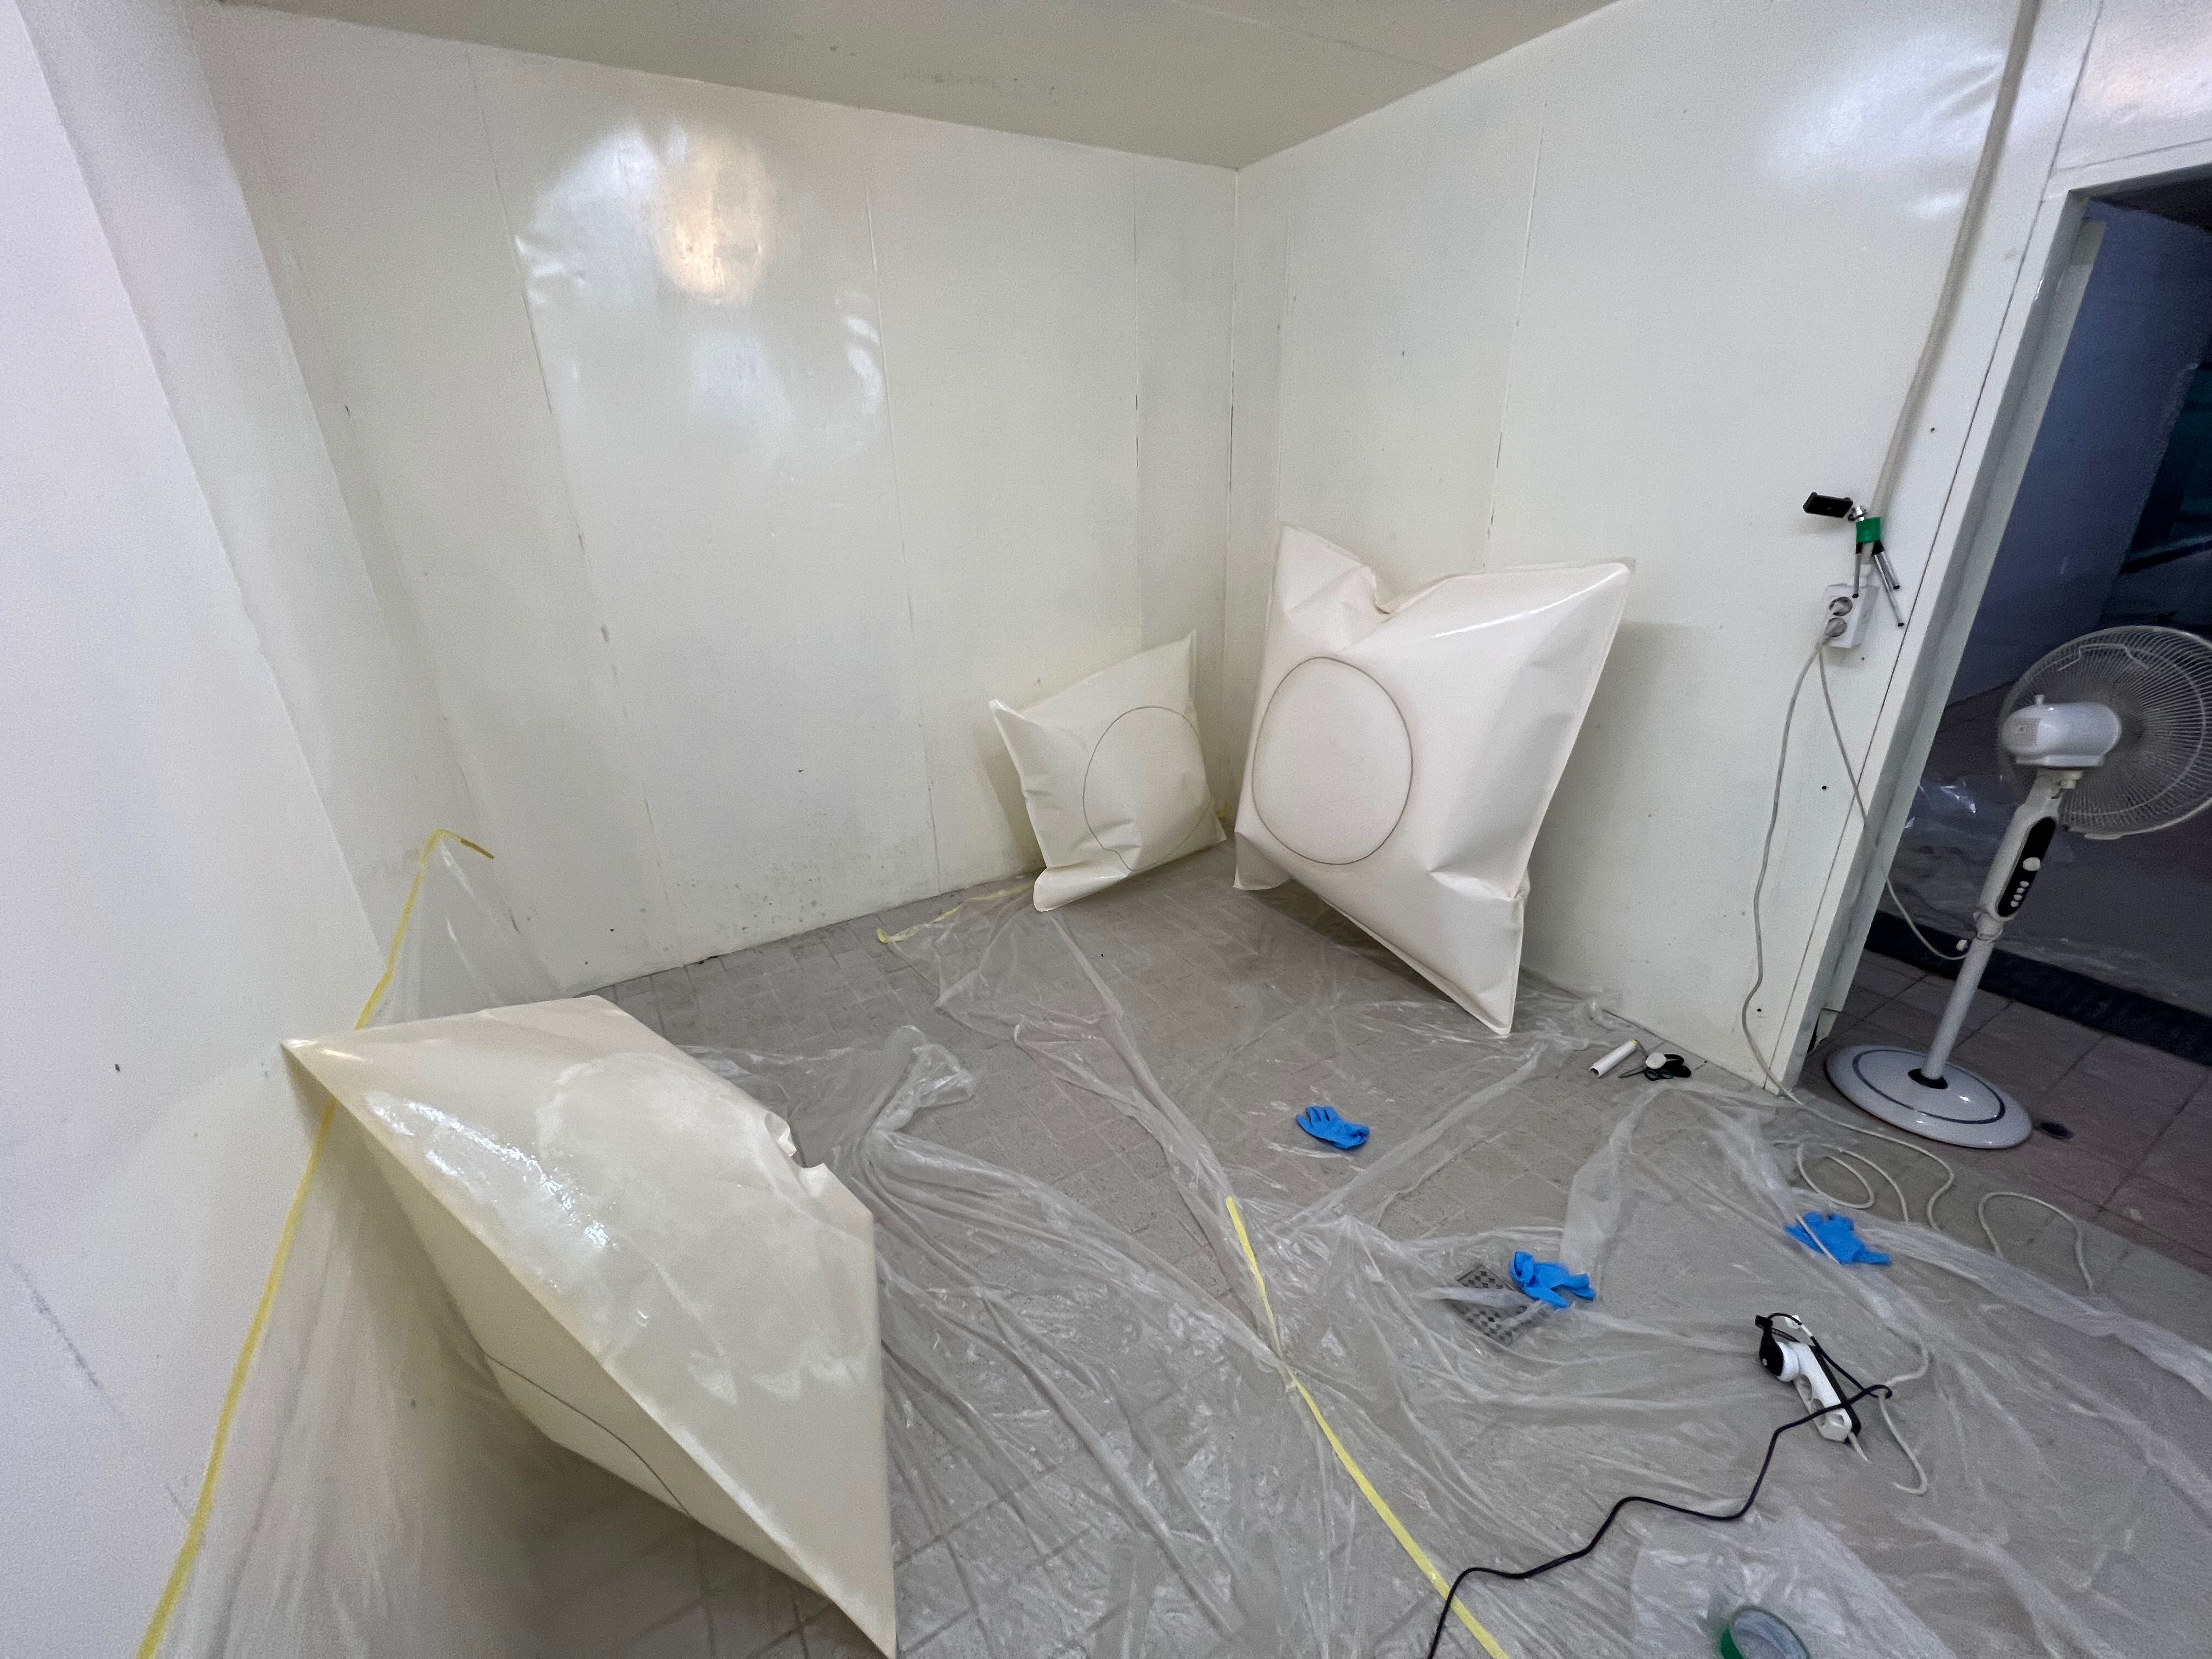 The walk in freezer, converted to resin room